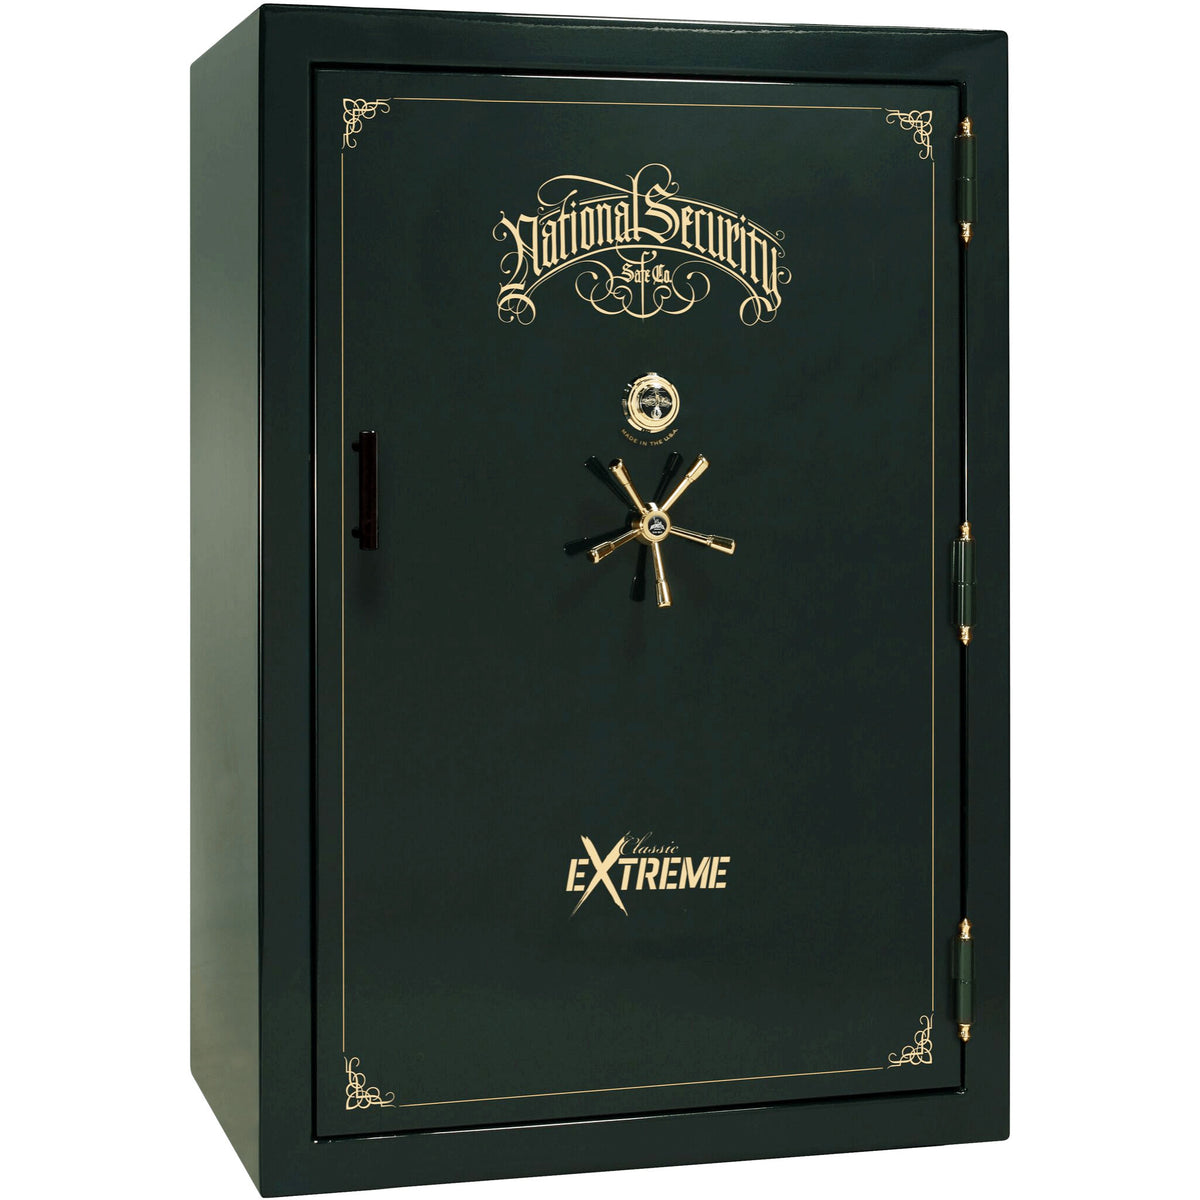 Liberty Classic Select Extreme Wide Body Safe in Green Gloss with Brass Mechanical Lock.